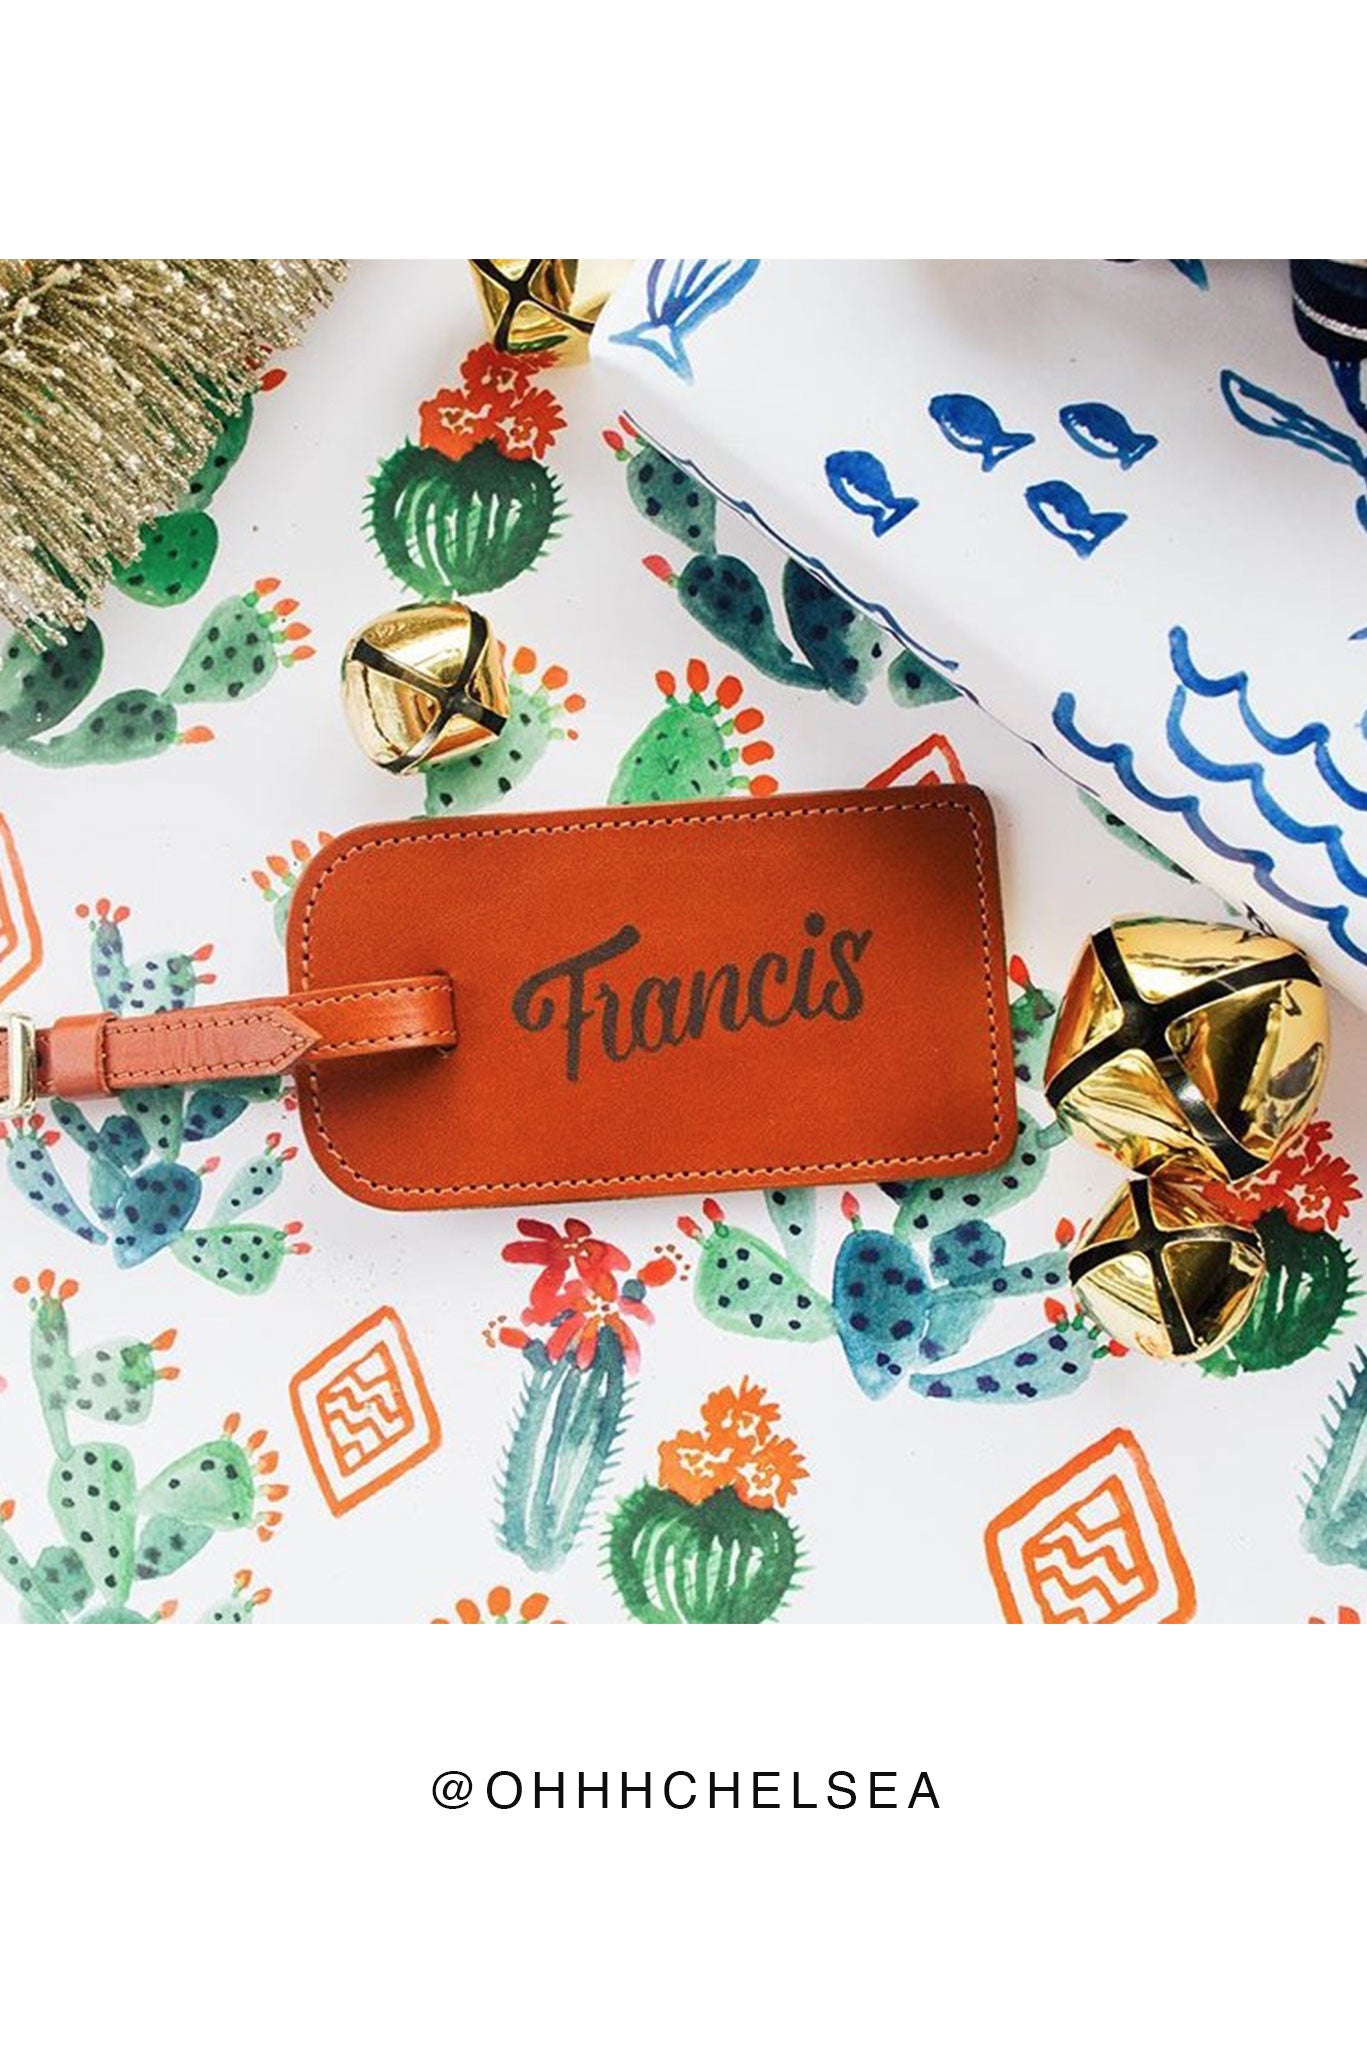 FOTO | Cognac Leather Luggage Tag - genuine leather luggage tag that can be personalized with gold foil initials, a monogram or business logo making it the perfect personalized travel gift.